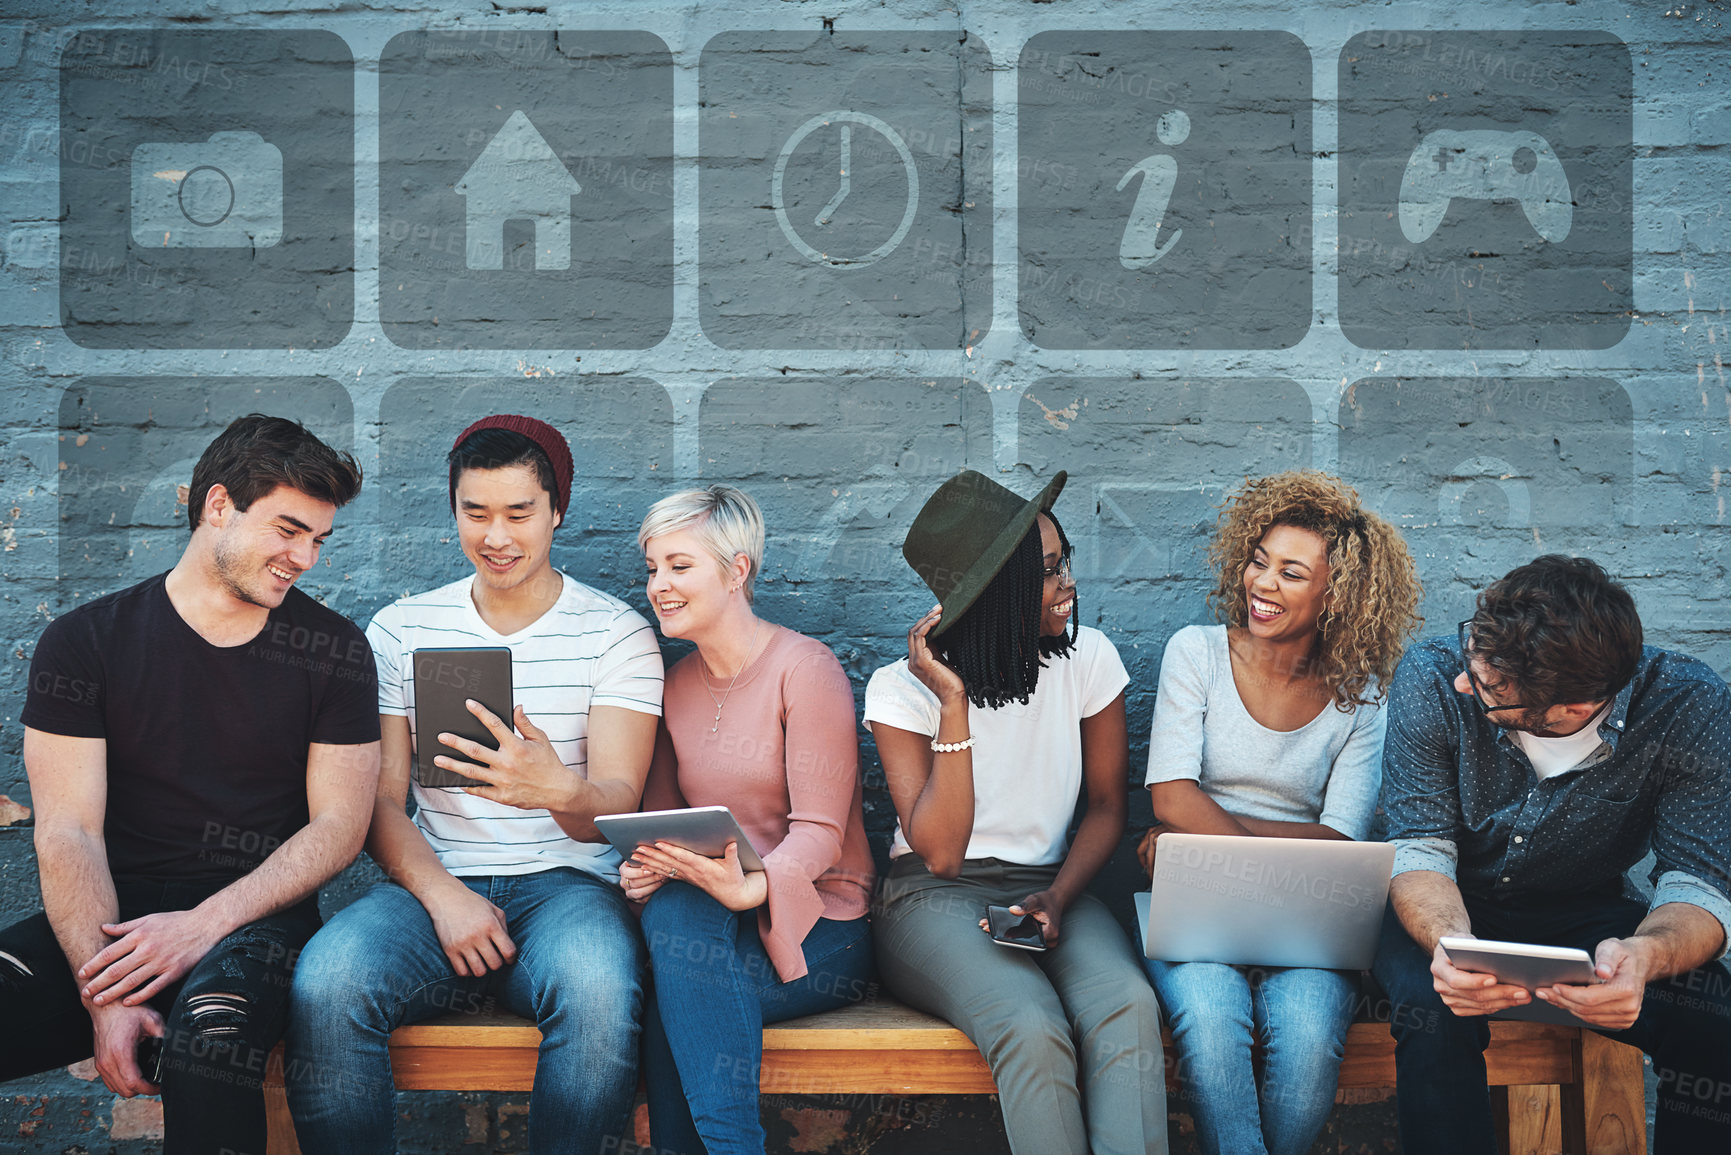 Buy stock photo Technology, diversity and group of young people on a bench browsing social media or the internet. Digital tablets, laptop and multiracial friends networking online together with icons by a gray wall.